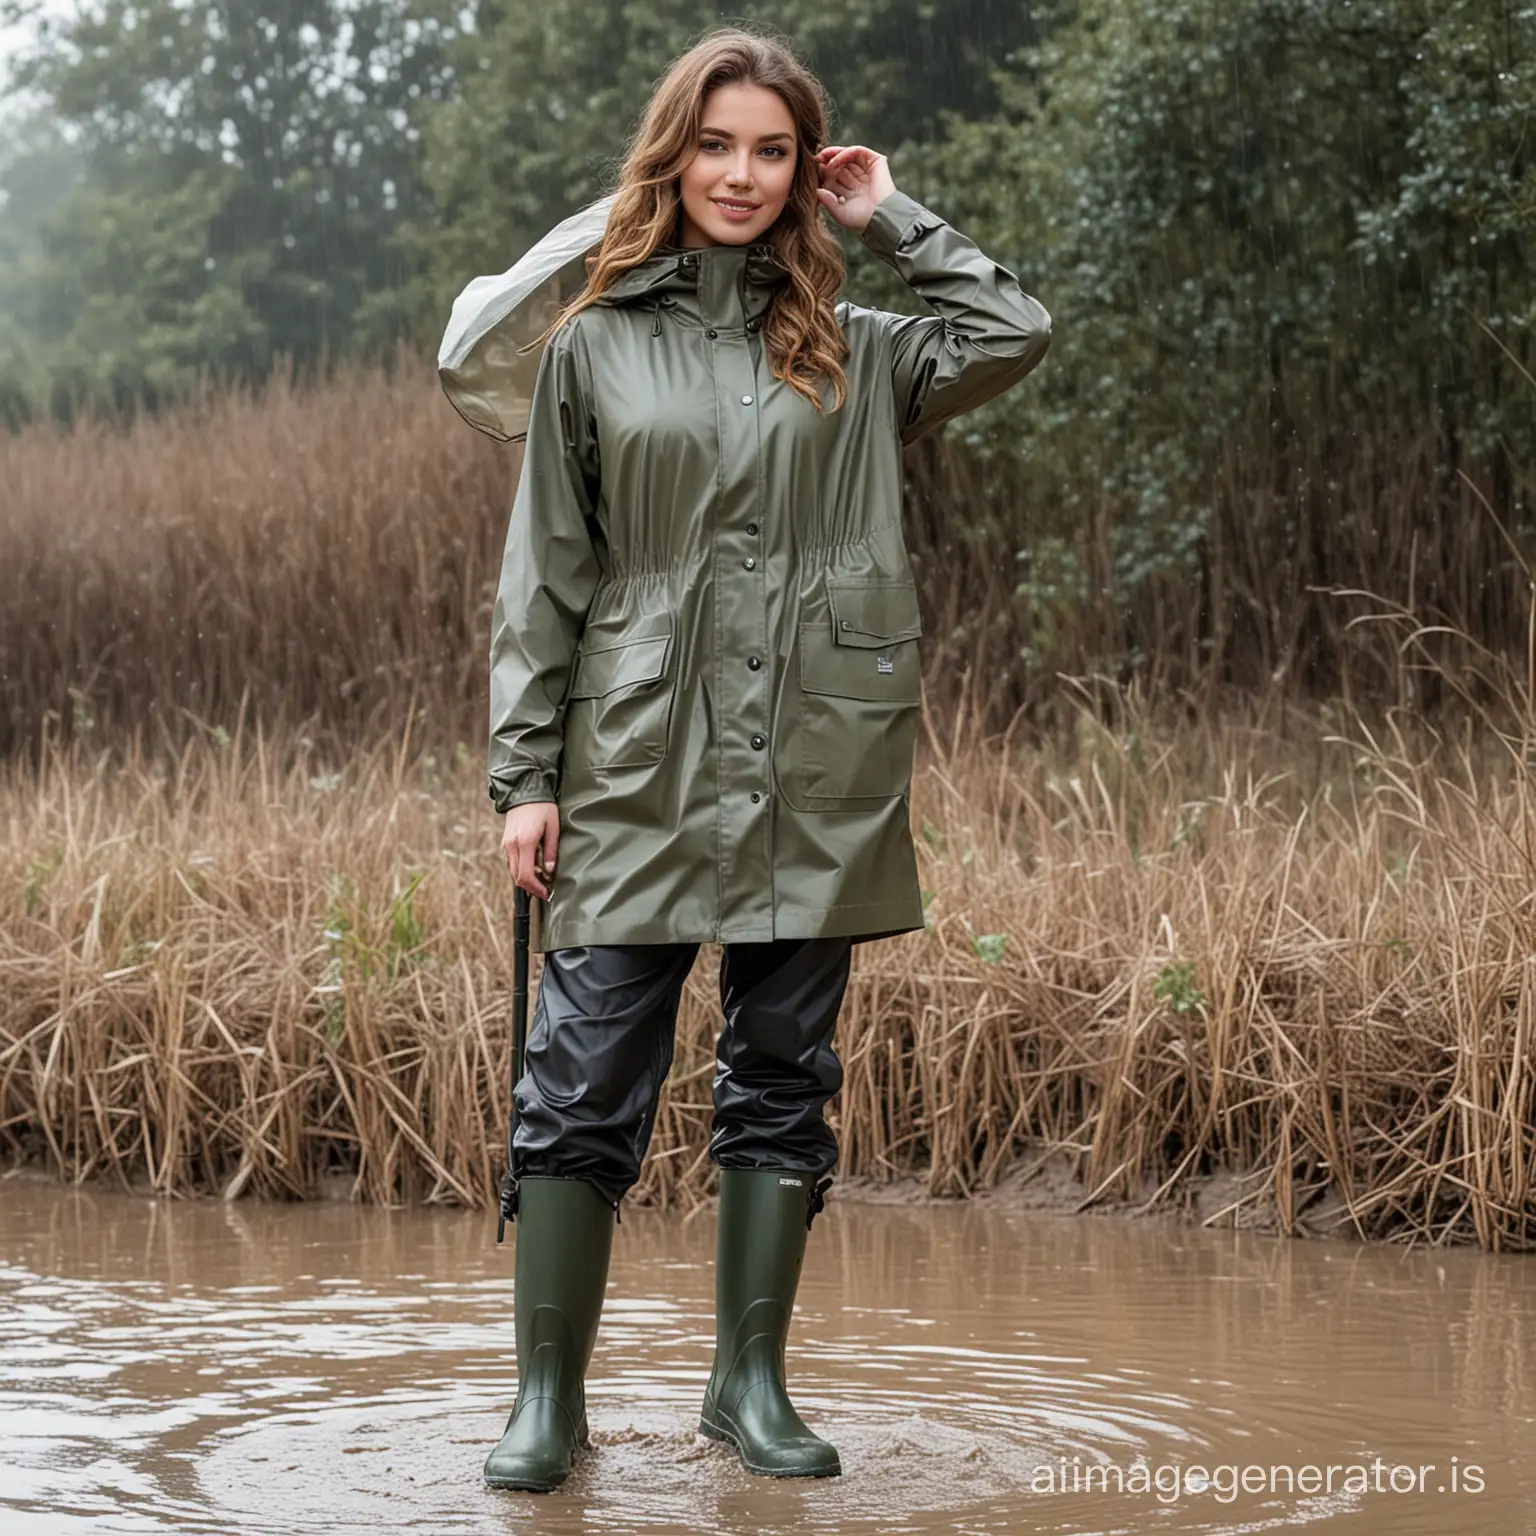 Women-in-Raincoats-and-Hip-Waders-Strolling-Through-Mud